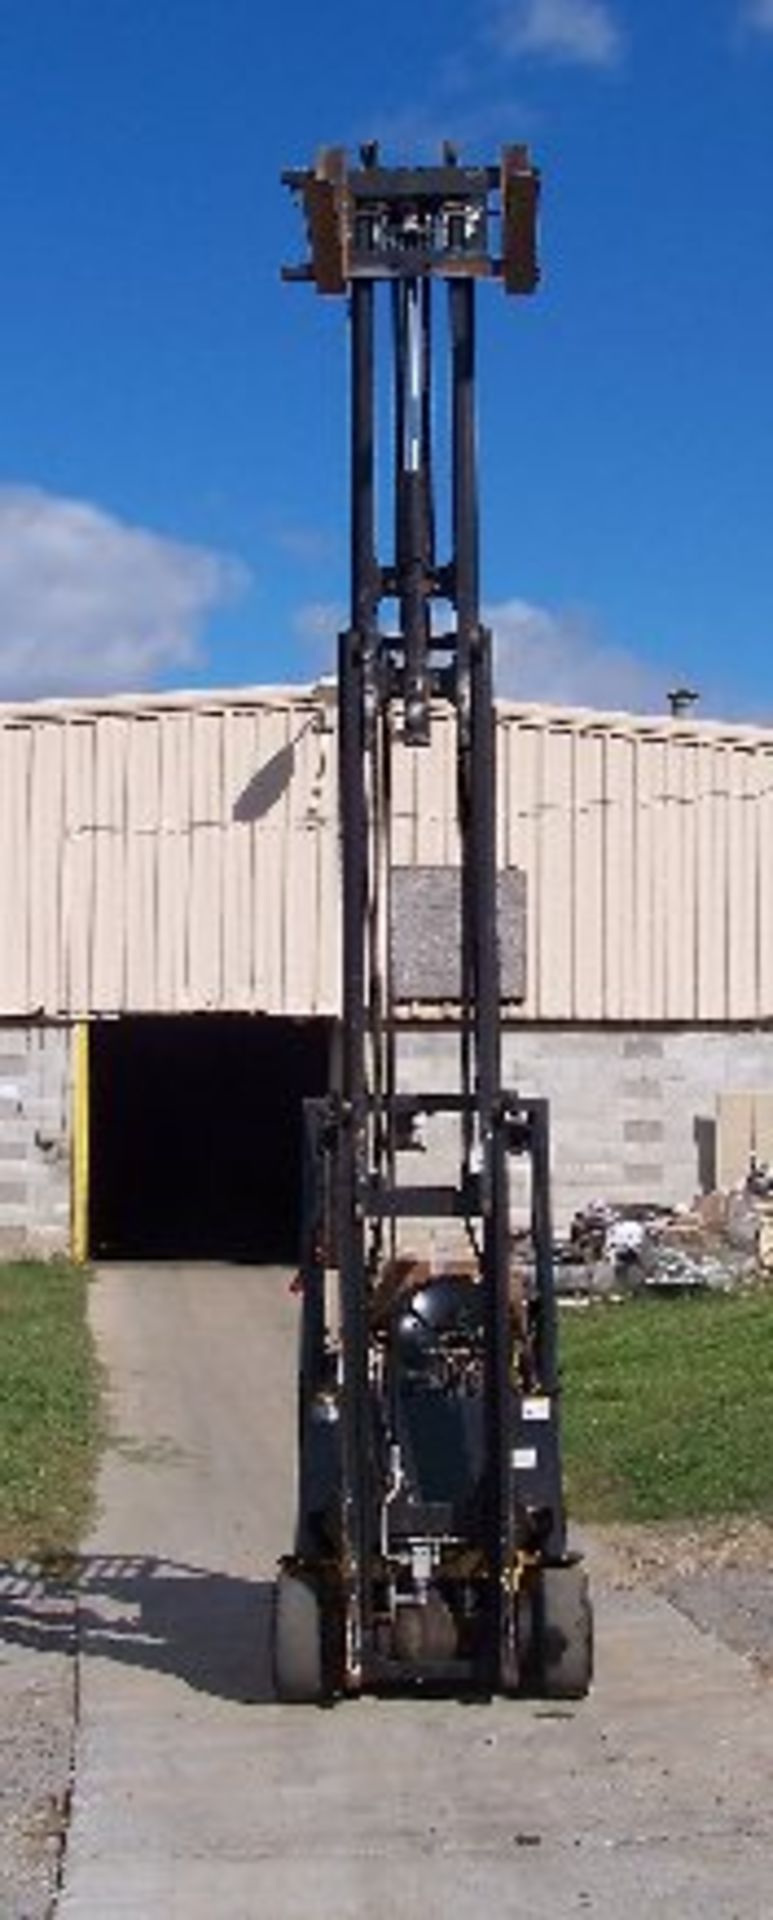 YALE FORKLIFT MDL GLC0AFNUAE032, PROPANE, SOLID TIRE, 3-STAGE, 189" LIFT, 3,000LB - Image 9 of 14